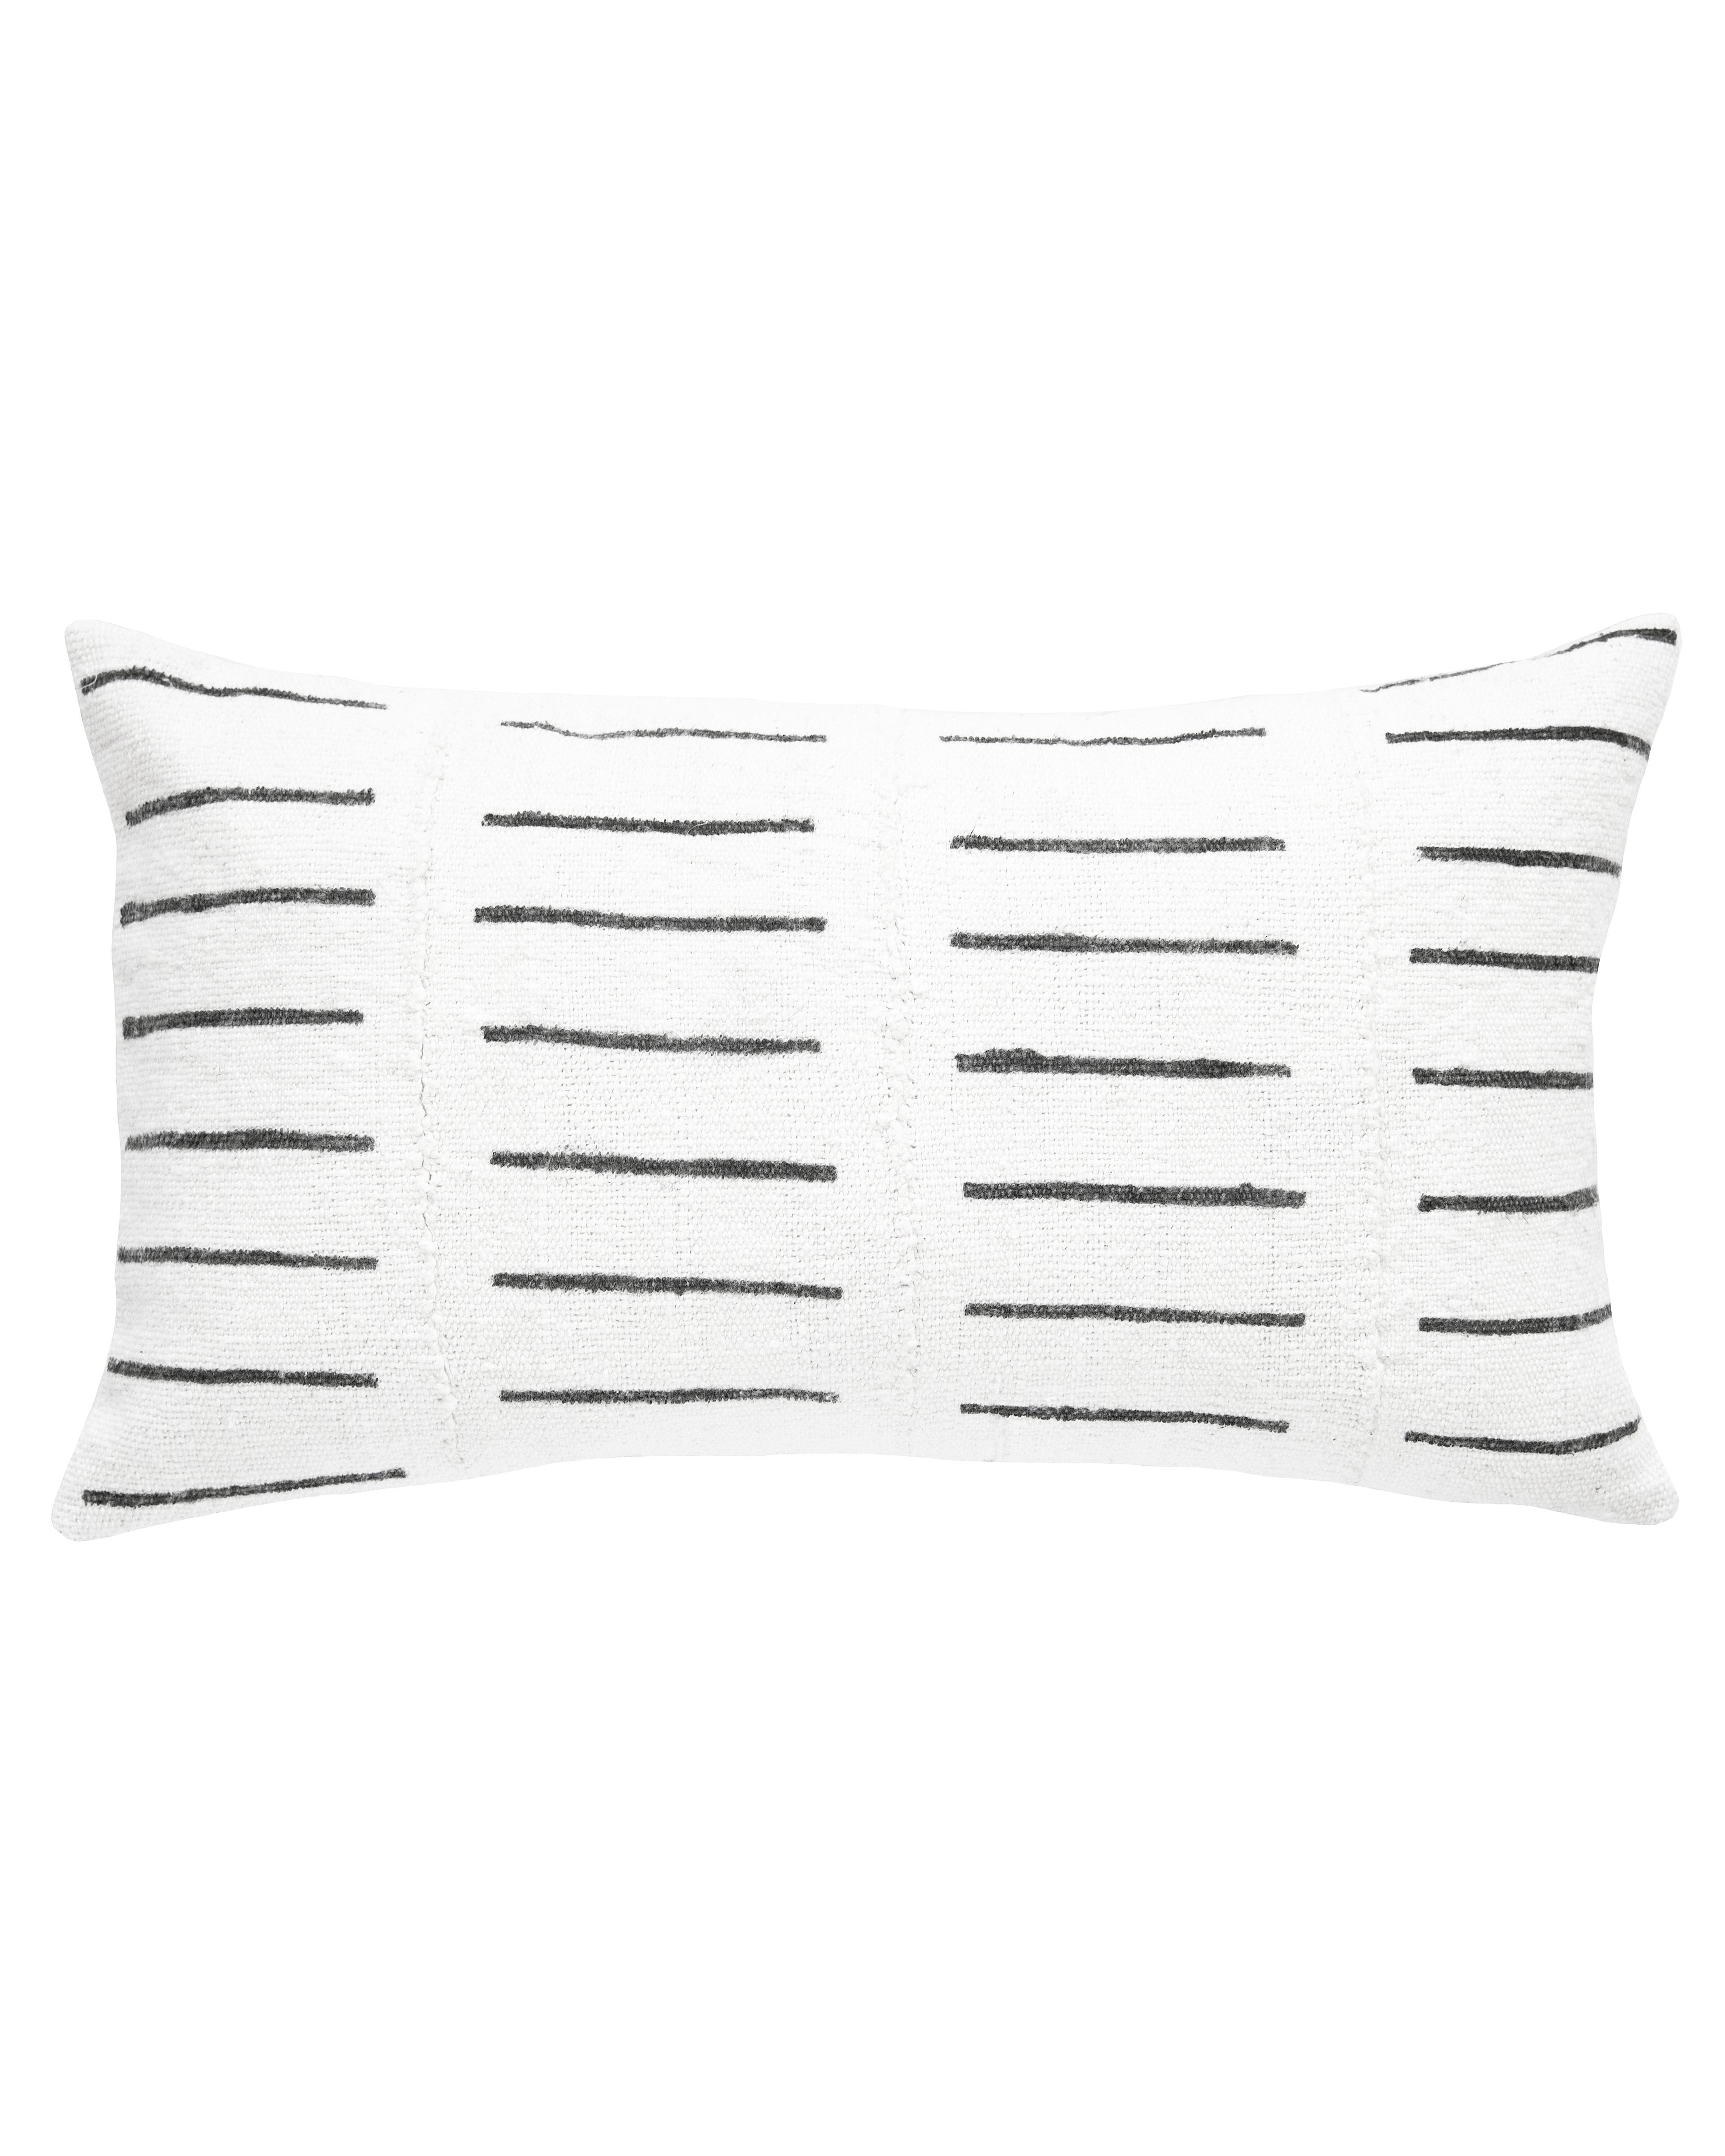 dash mud cloth lumbar pillow in white MADE TO ORDER - PillowPia